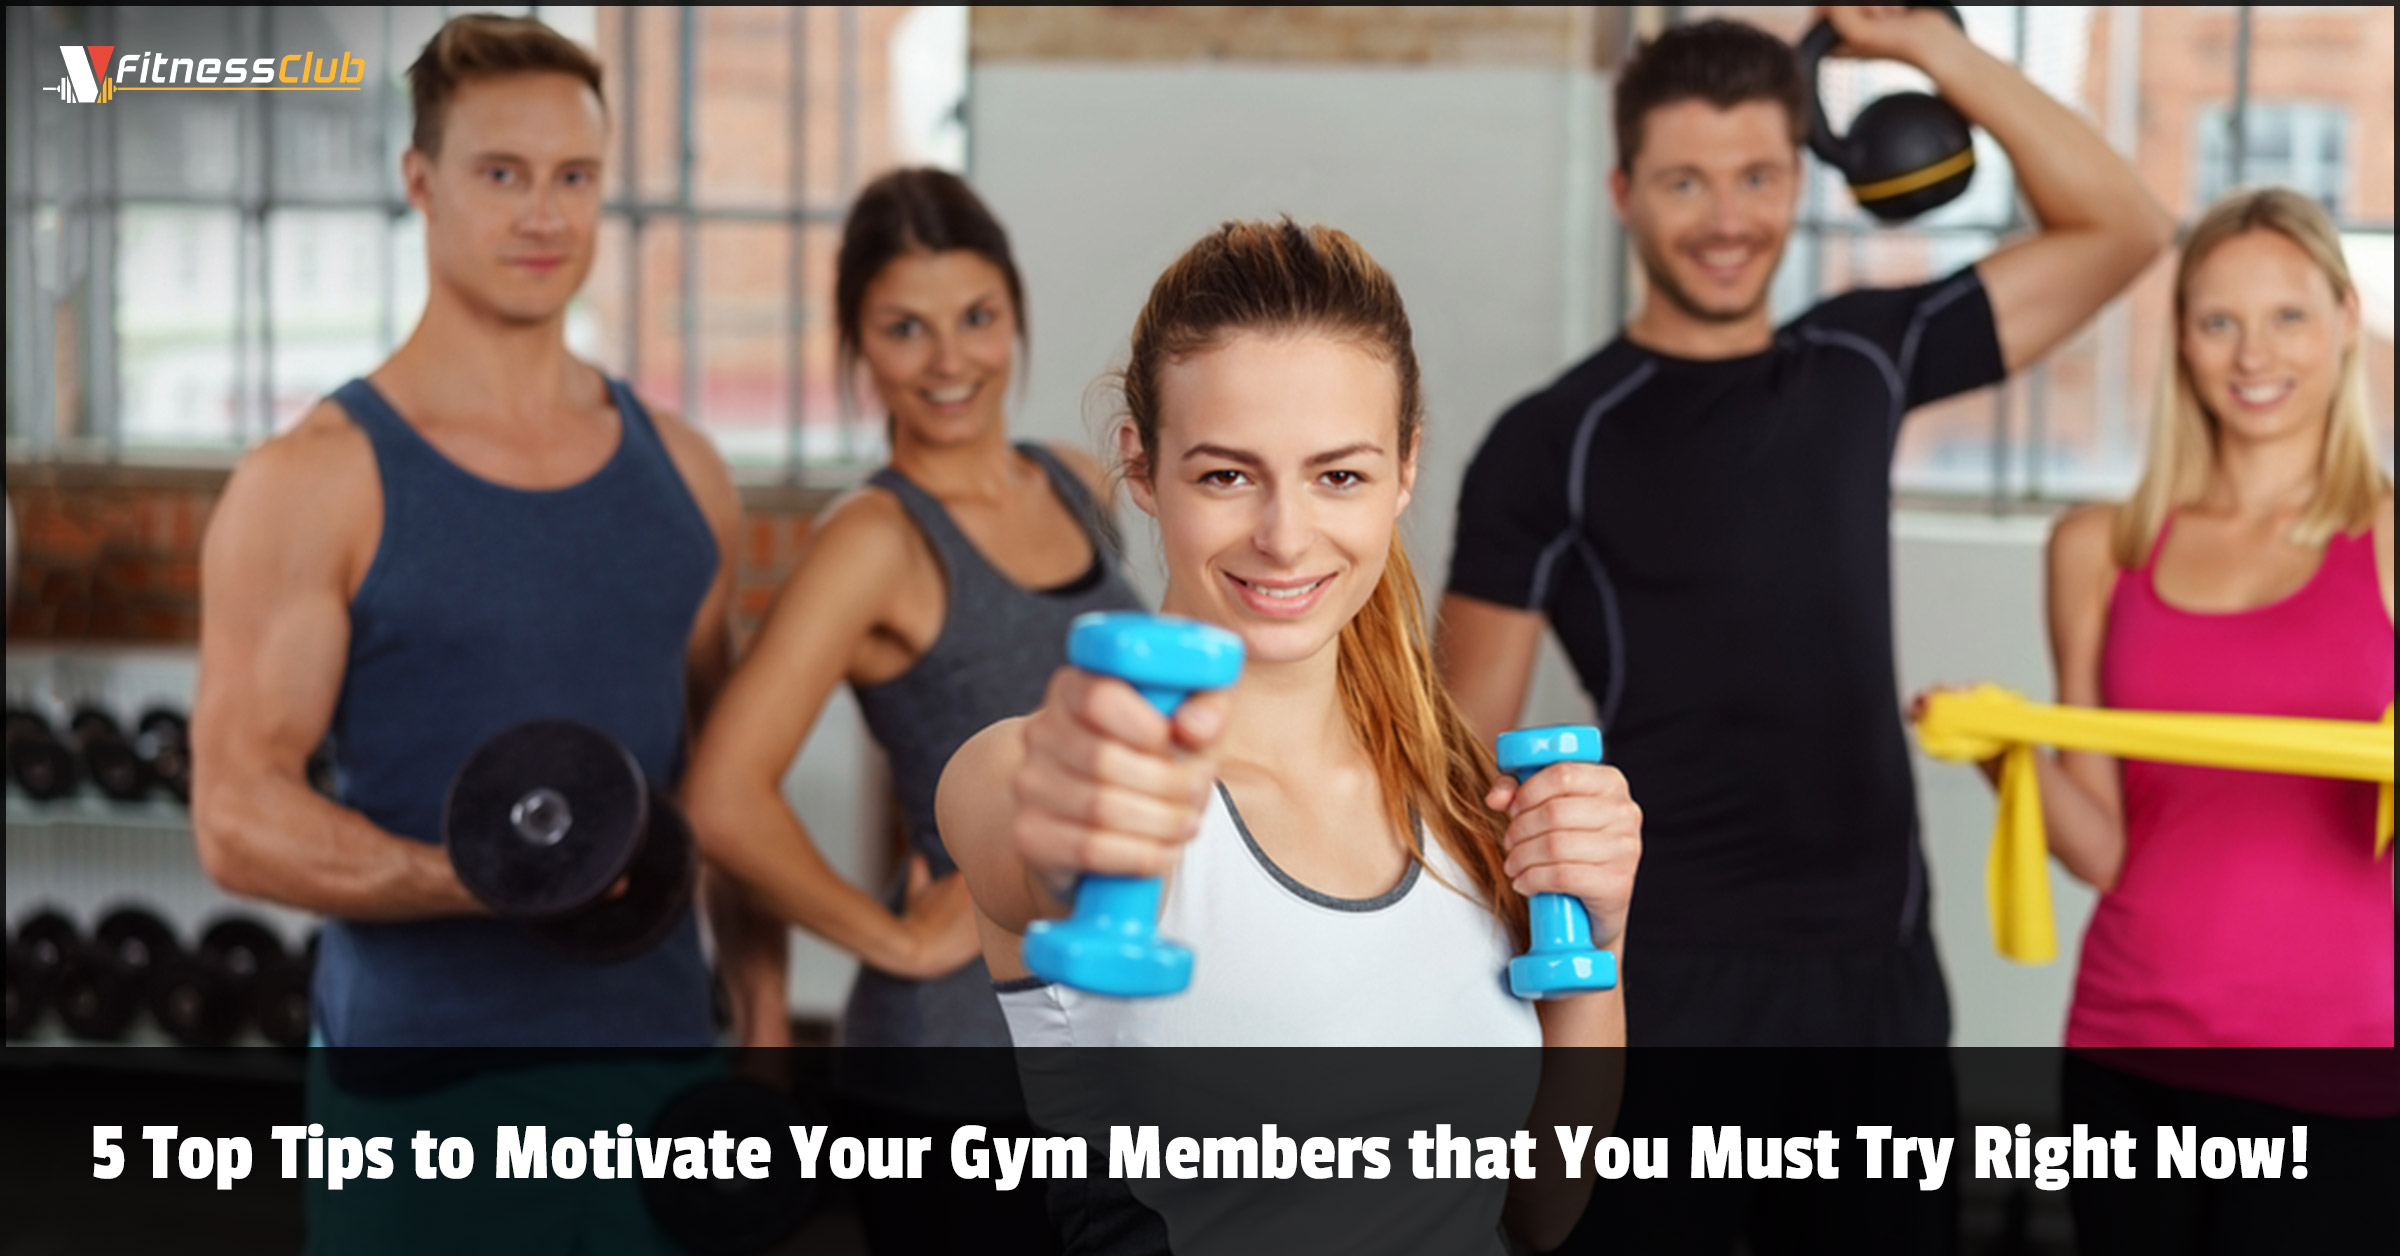 5 Top Tips to Motivate Your Gym Members that You Must Try Right Now!